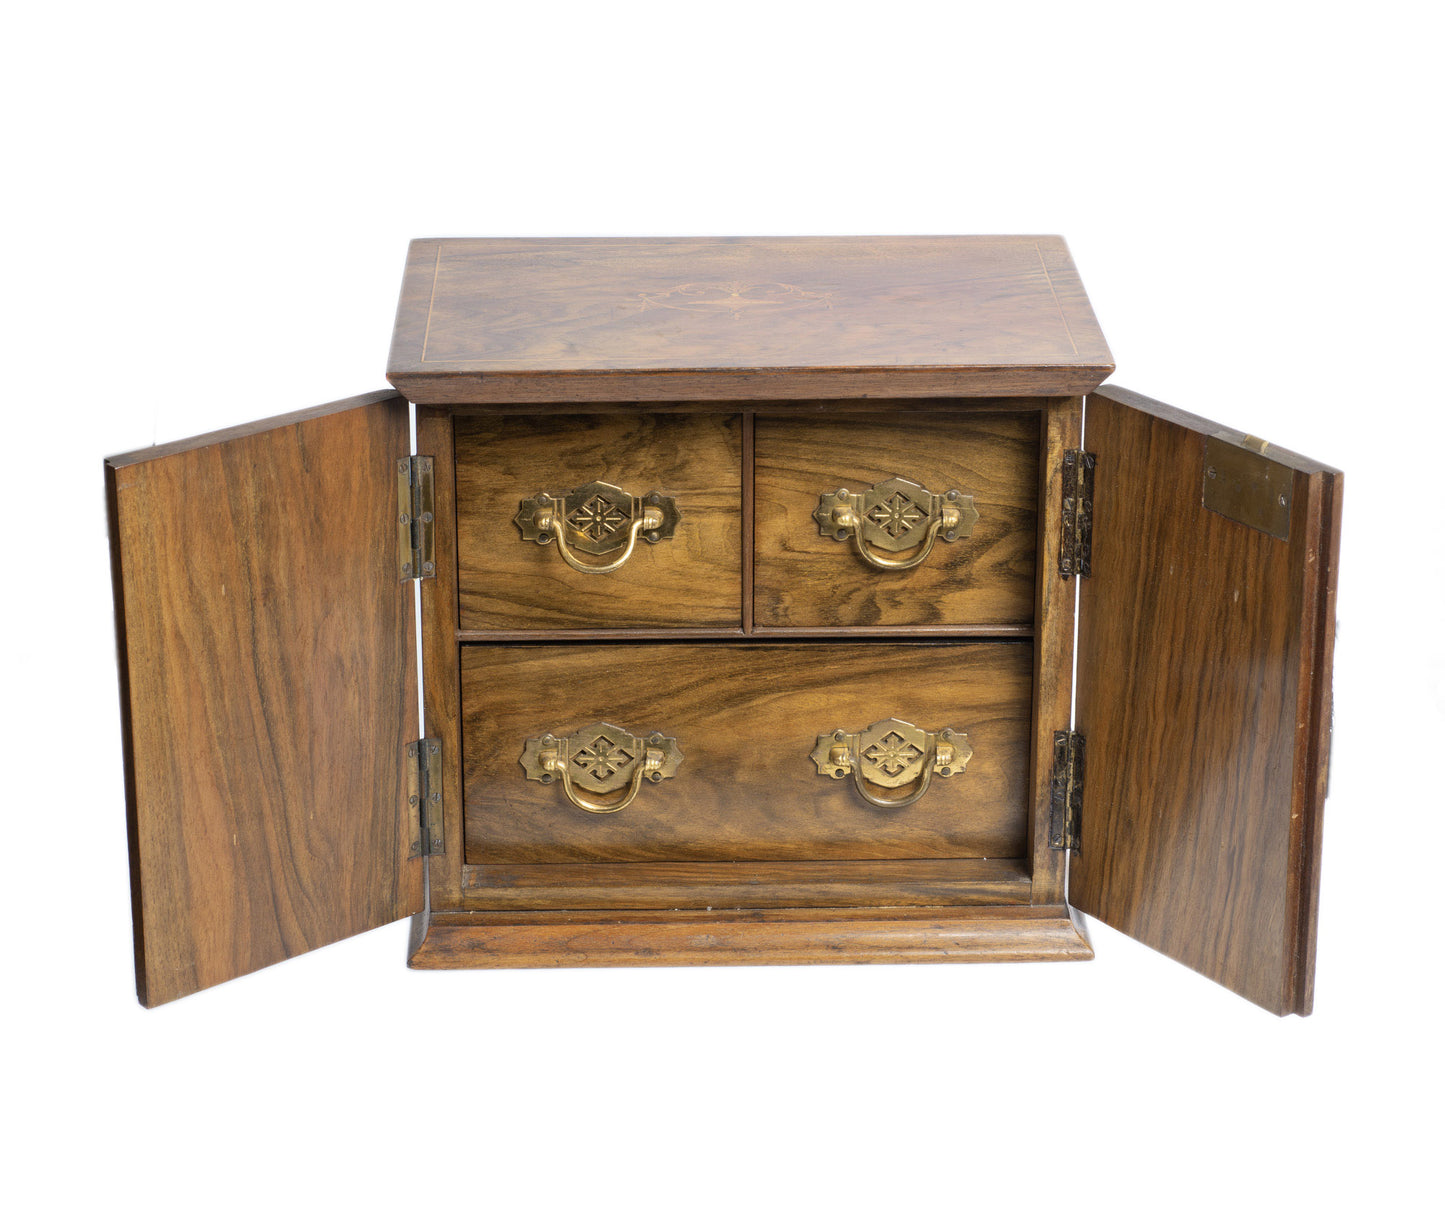 Antique Walnut Table Top Cabinet Box - Internal Drawers & Inlaid Adams Detailing (Code 2758)